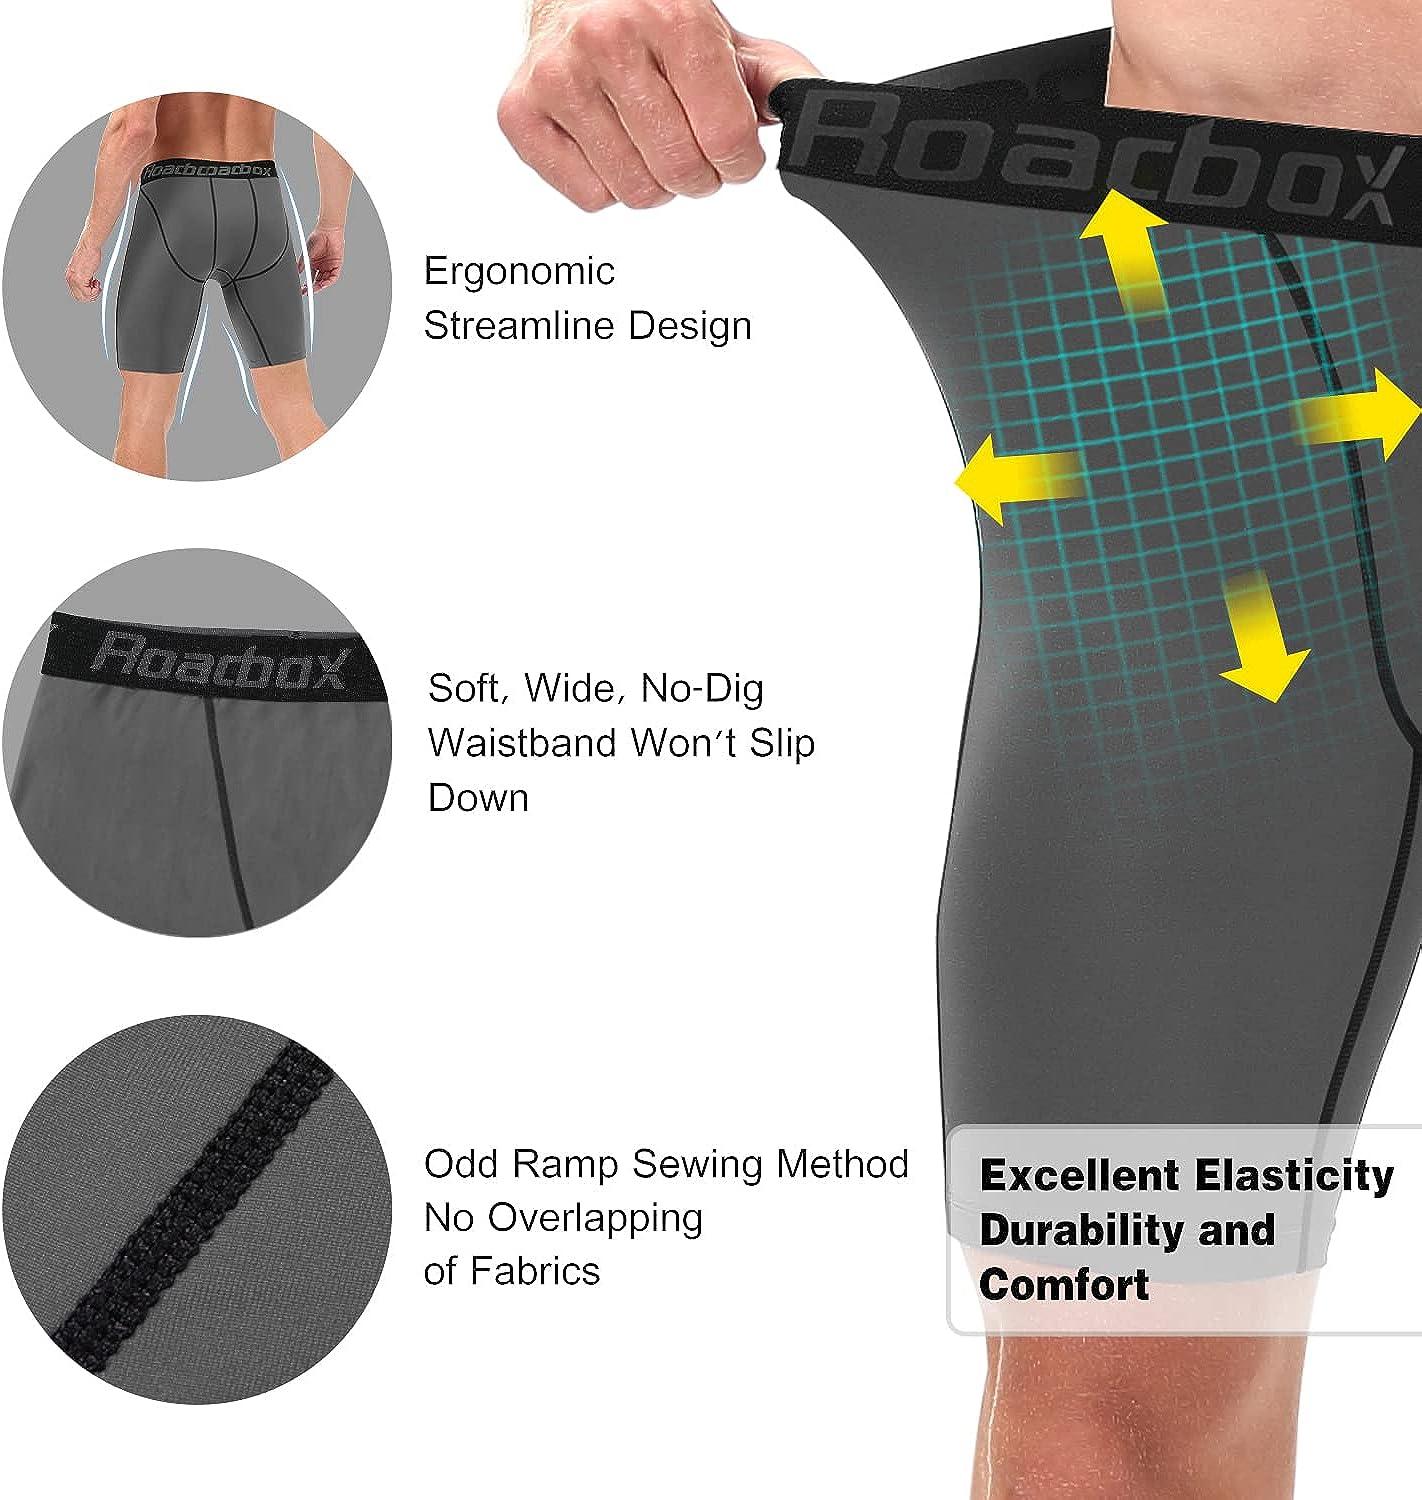 Roadbox Compression Shorts for Men 3 Pack Cool Dry Athletic